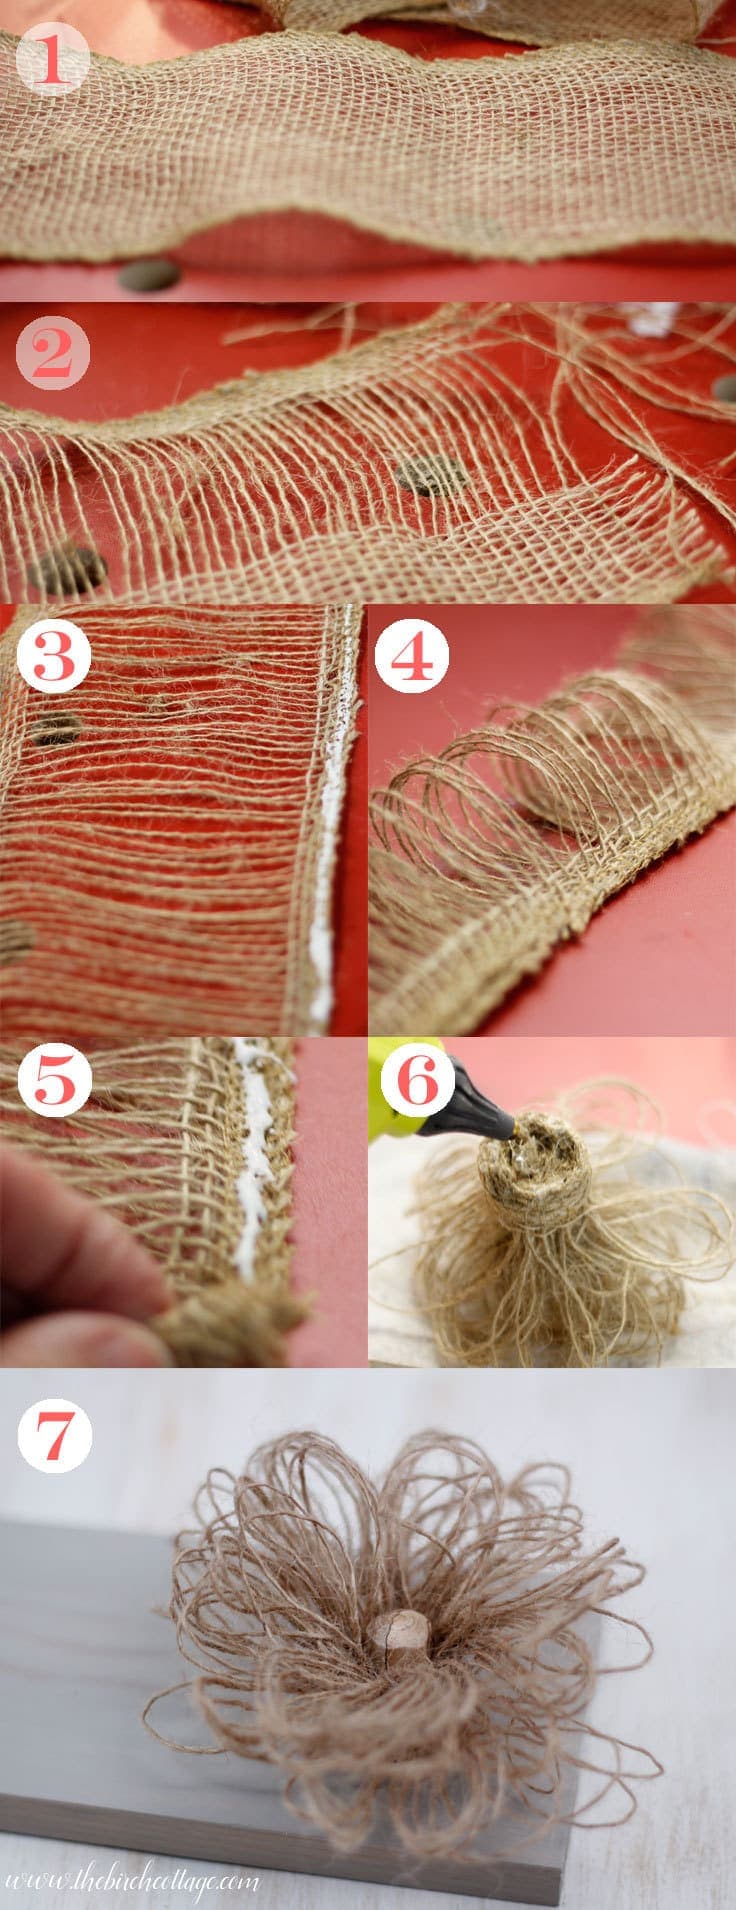 Easy to Make Burlap Flowers/How to Make Easy Burlap Flowers/Easy Craft 